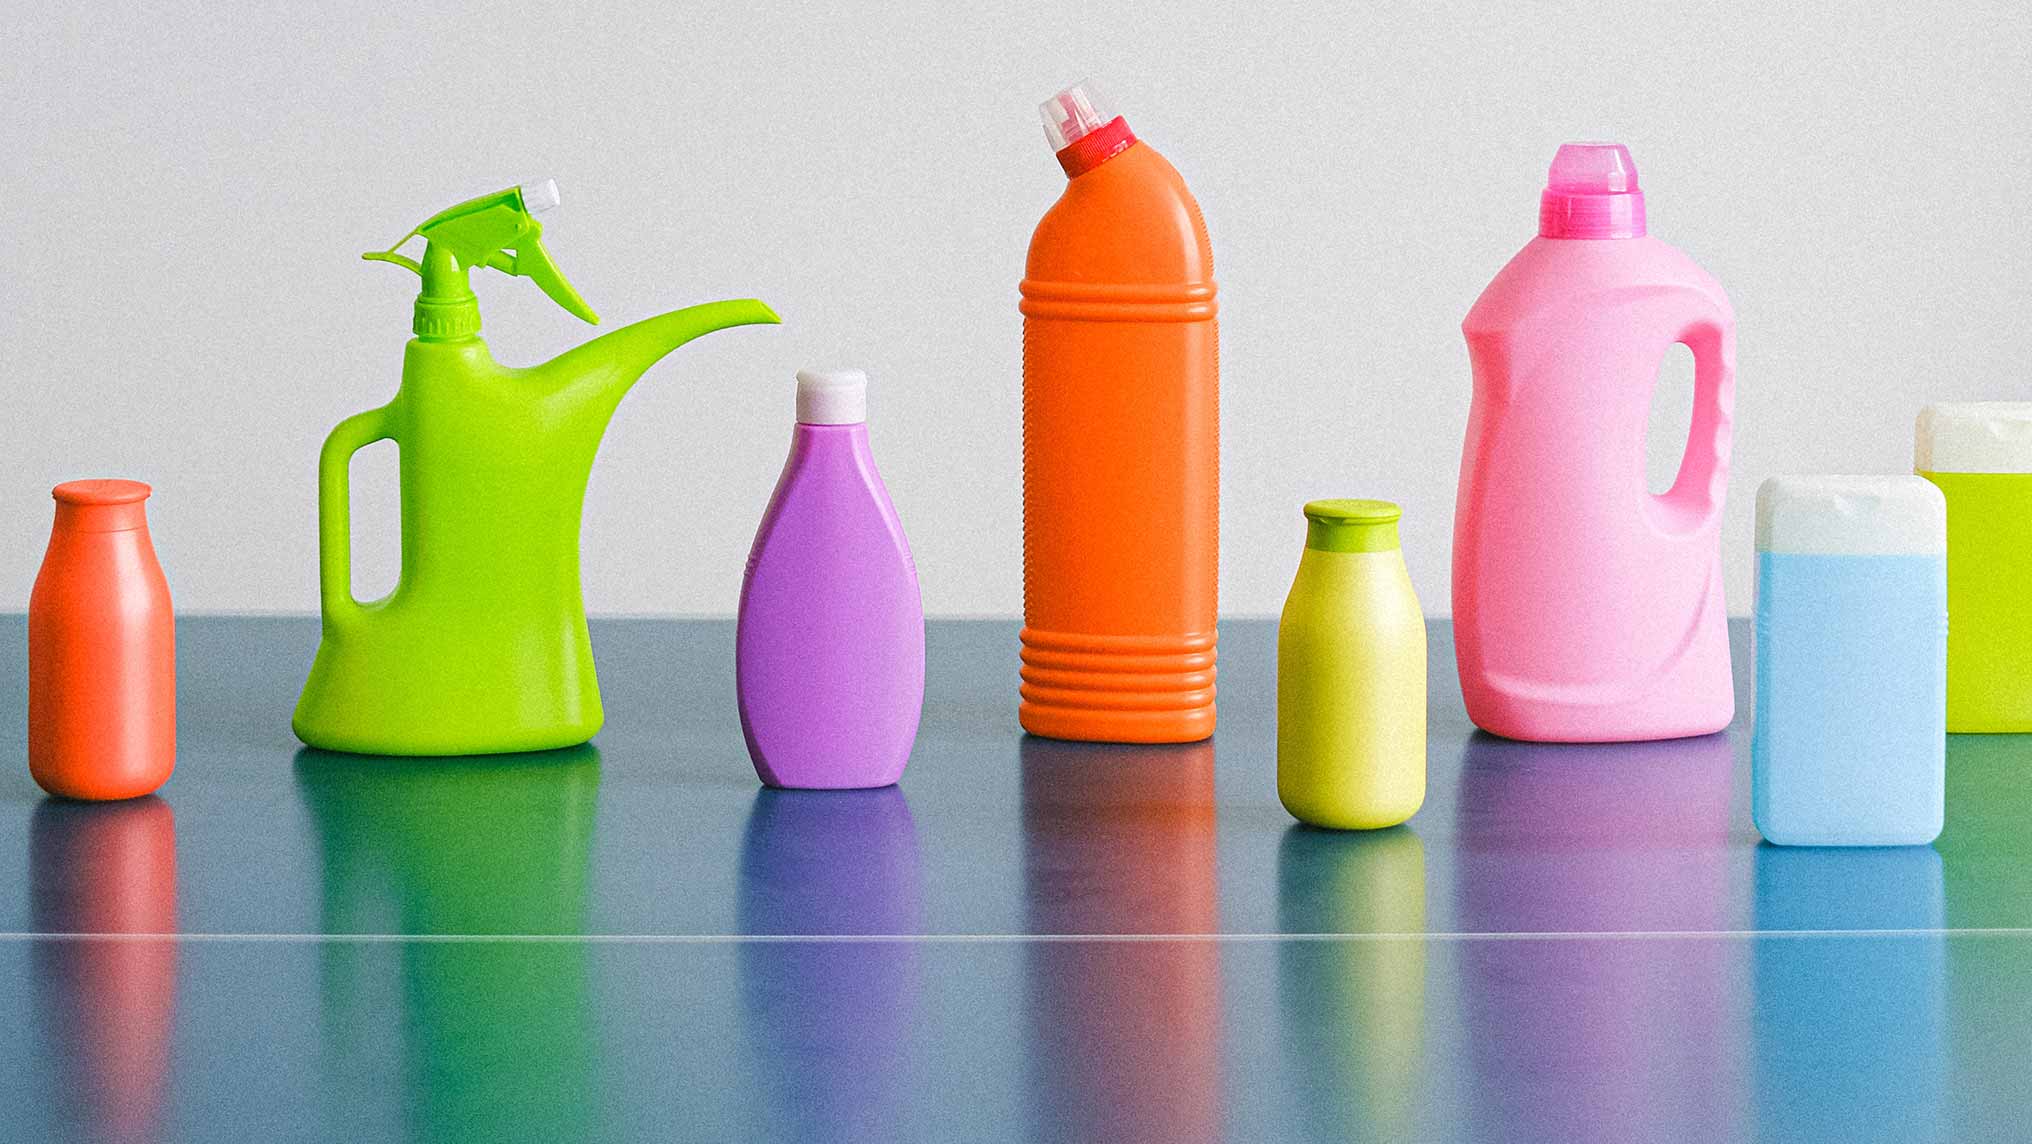 All-party roundtable on reuse: a line of bottles without branding ready to be reused